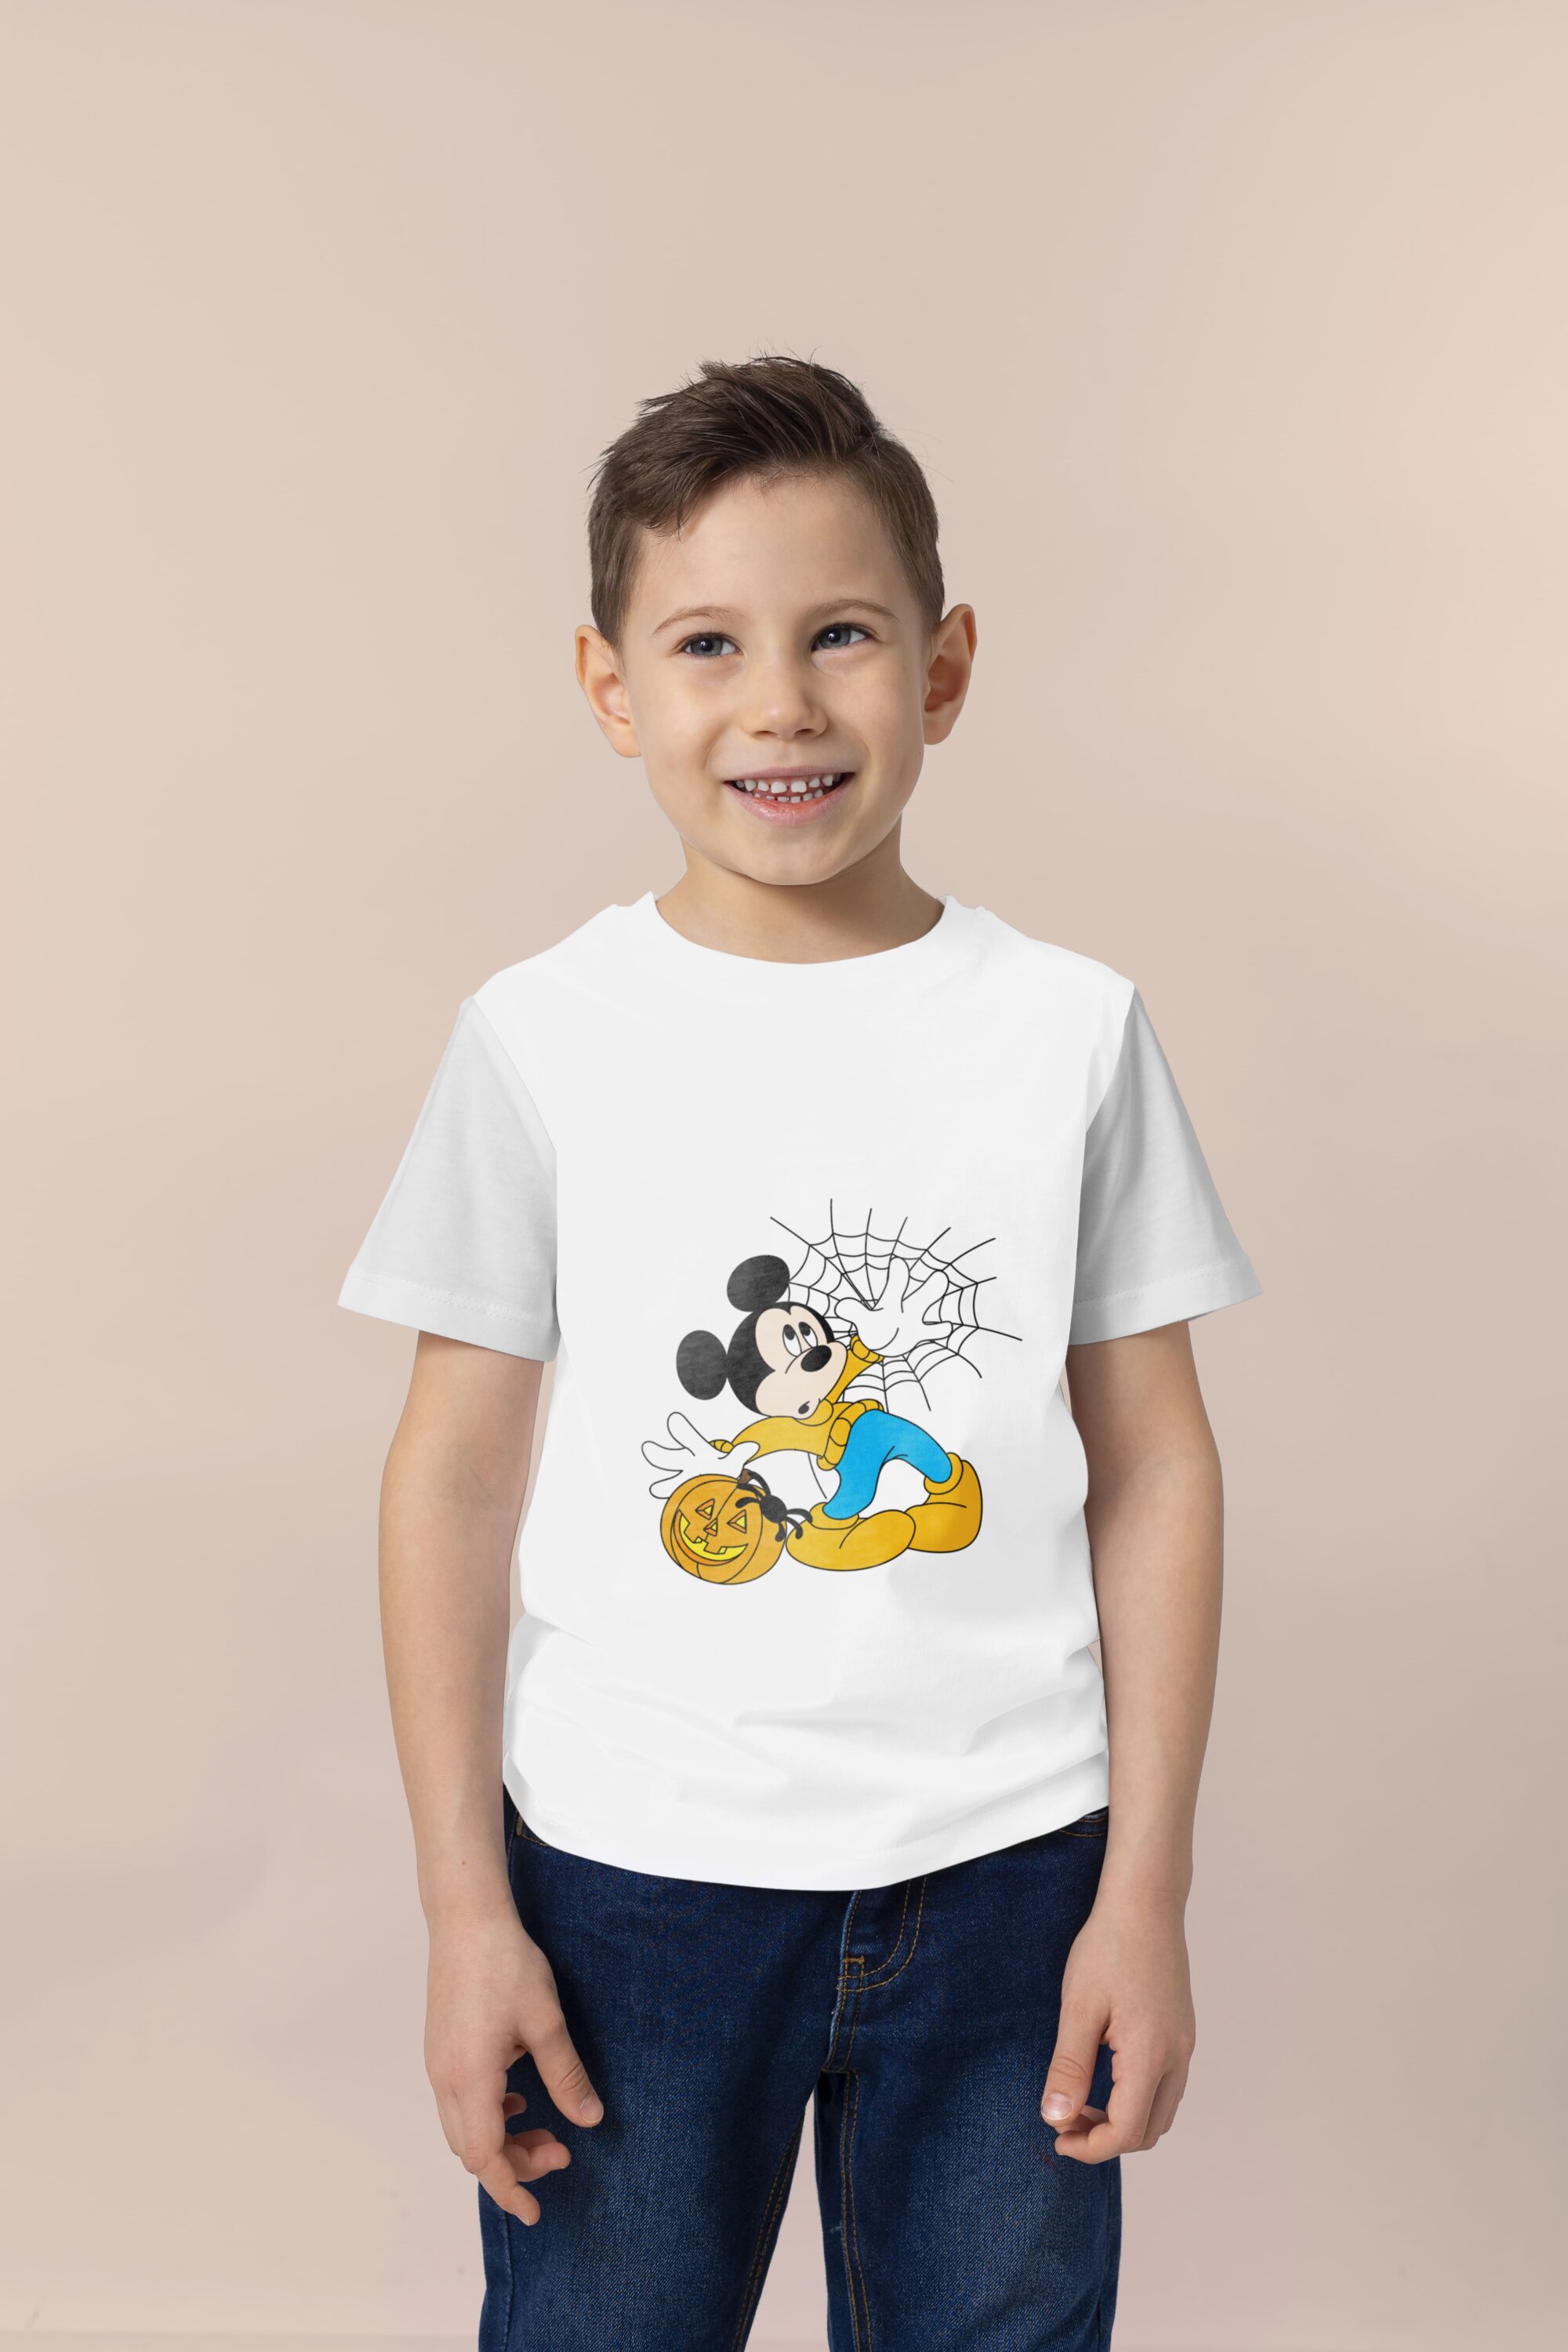 Cute Halloween Mickey Mouse on a white t-shirt.